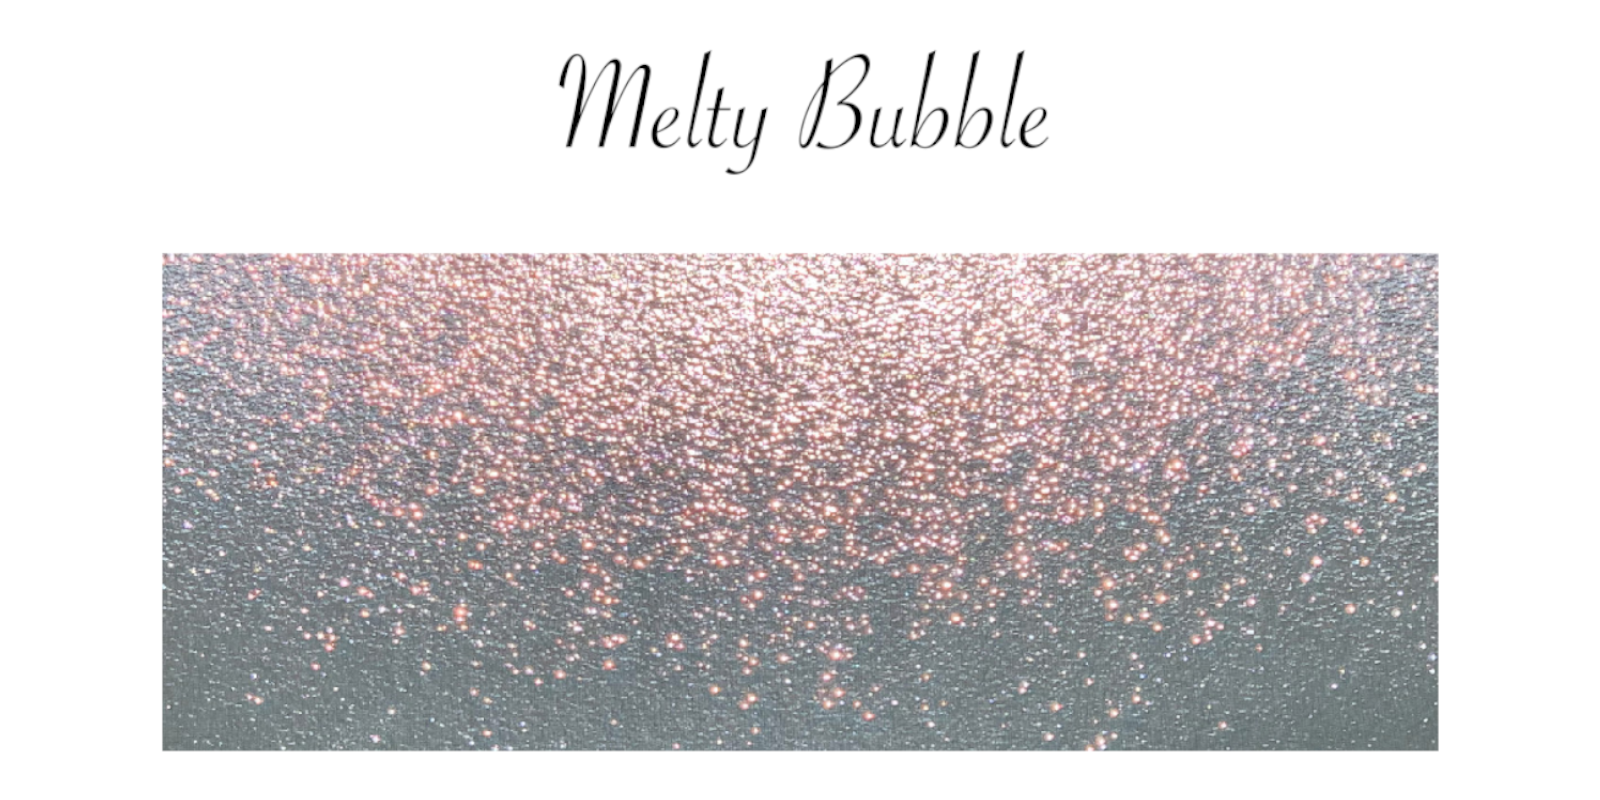 MeltyBubble